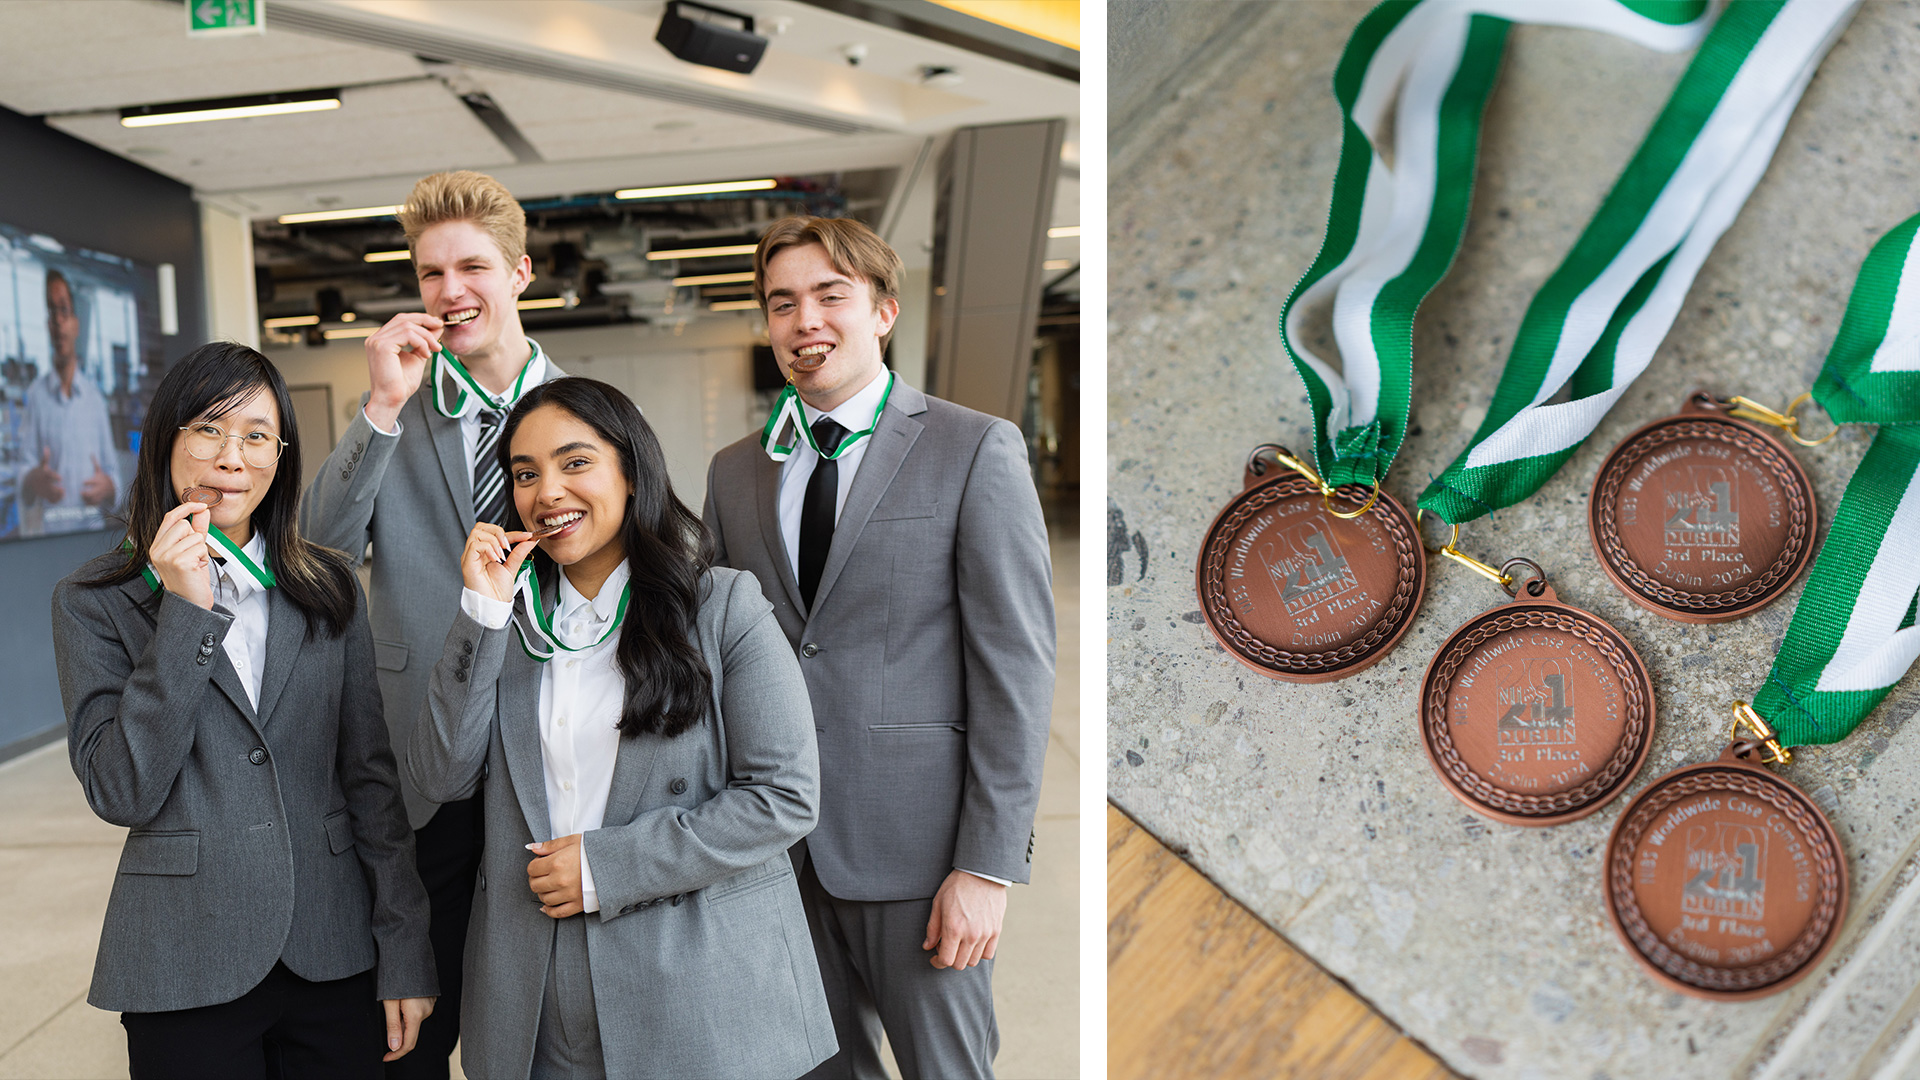 Left: Four individuals biting their bronze medals, Right: four bronze medals with green and white ribbon